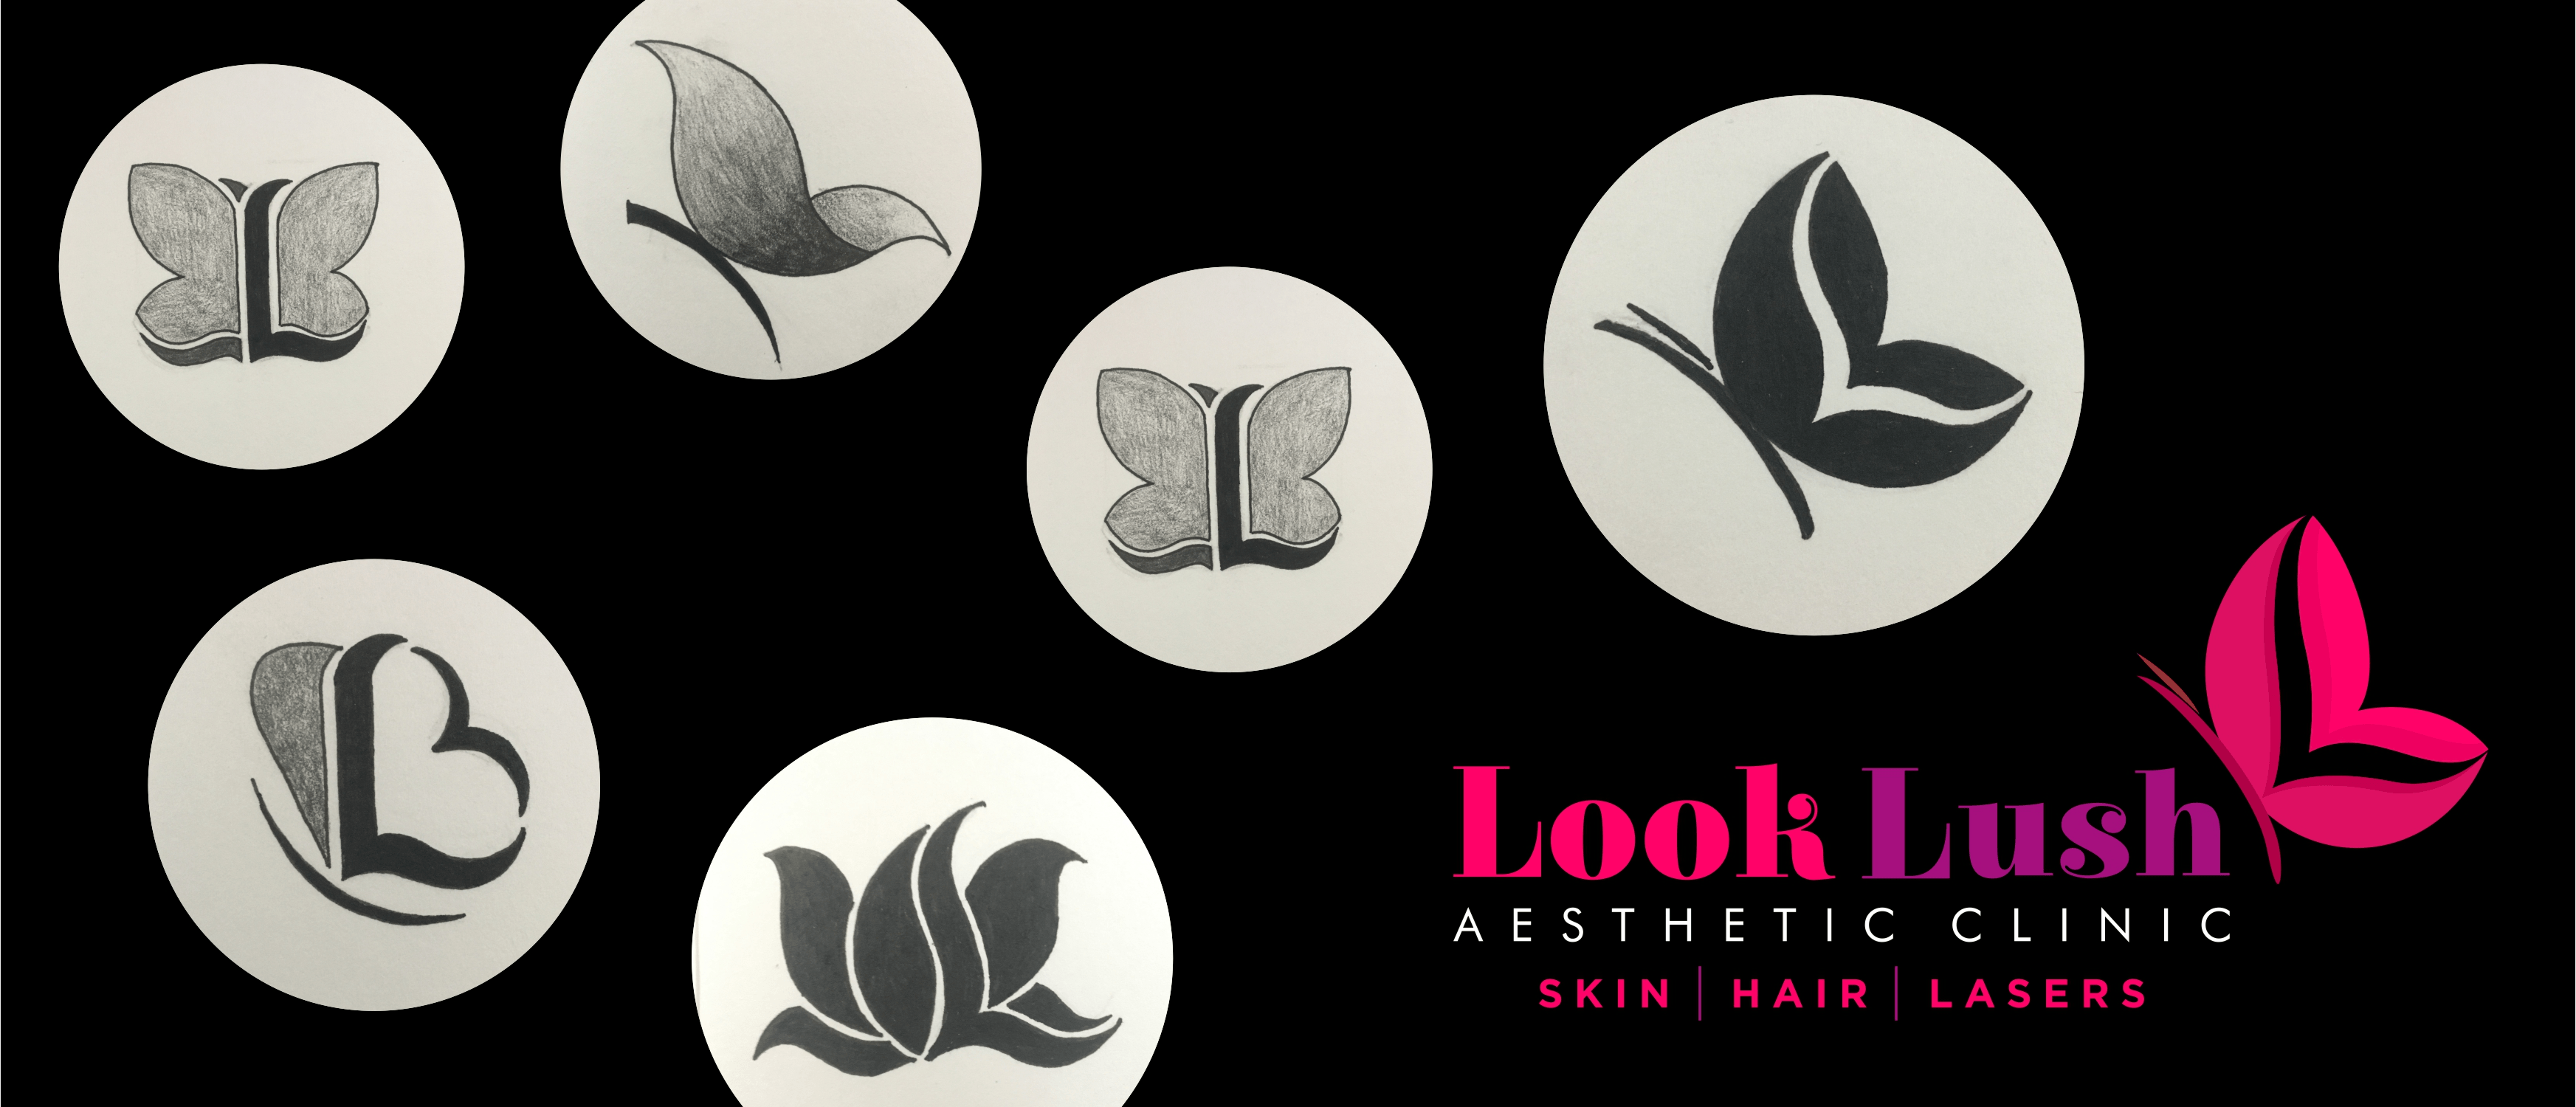 Look Lush Logo with Product Design